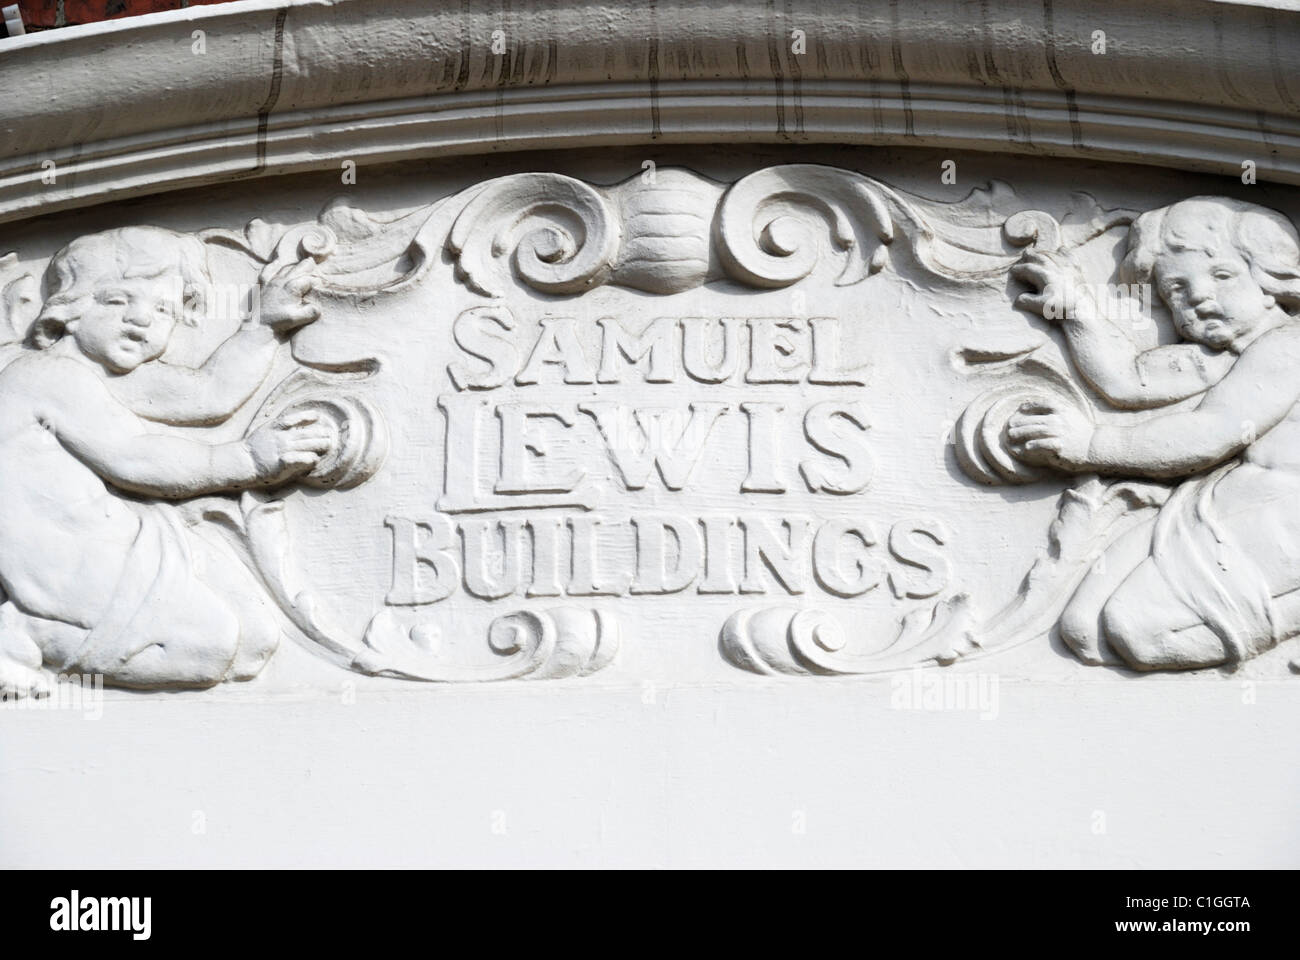 Samuel Lewis Buildings stone sign in Liverpool Road, London N1, England Stock Photo